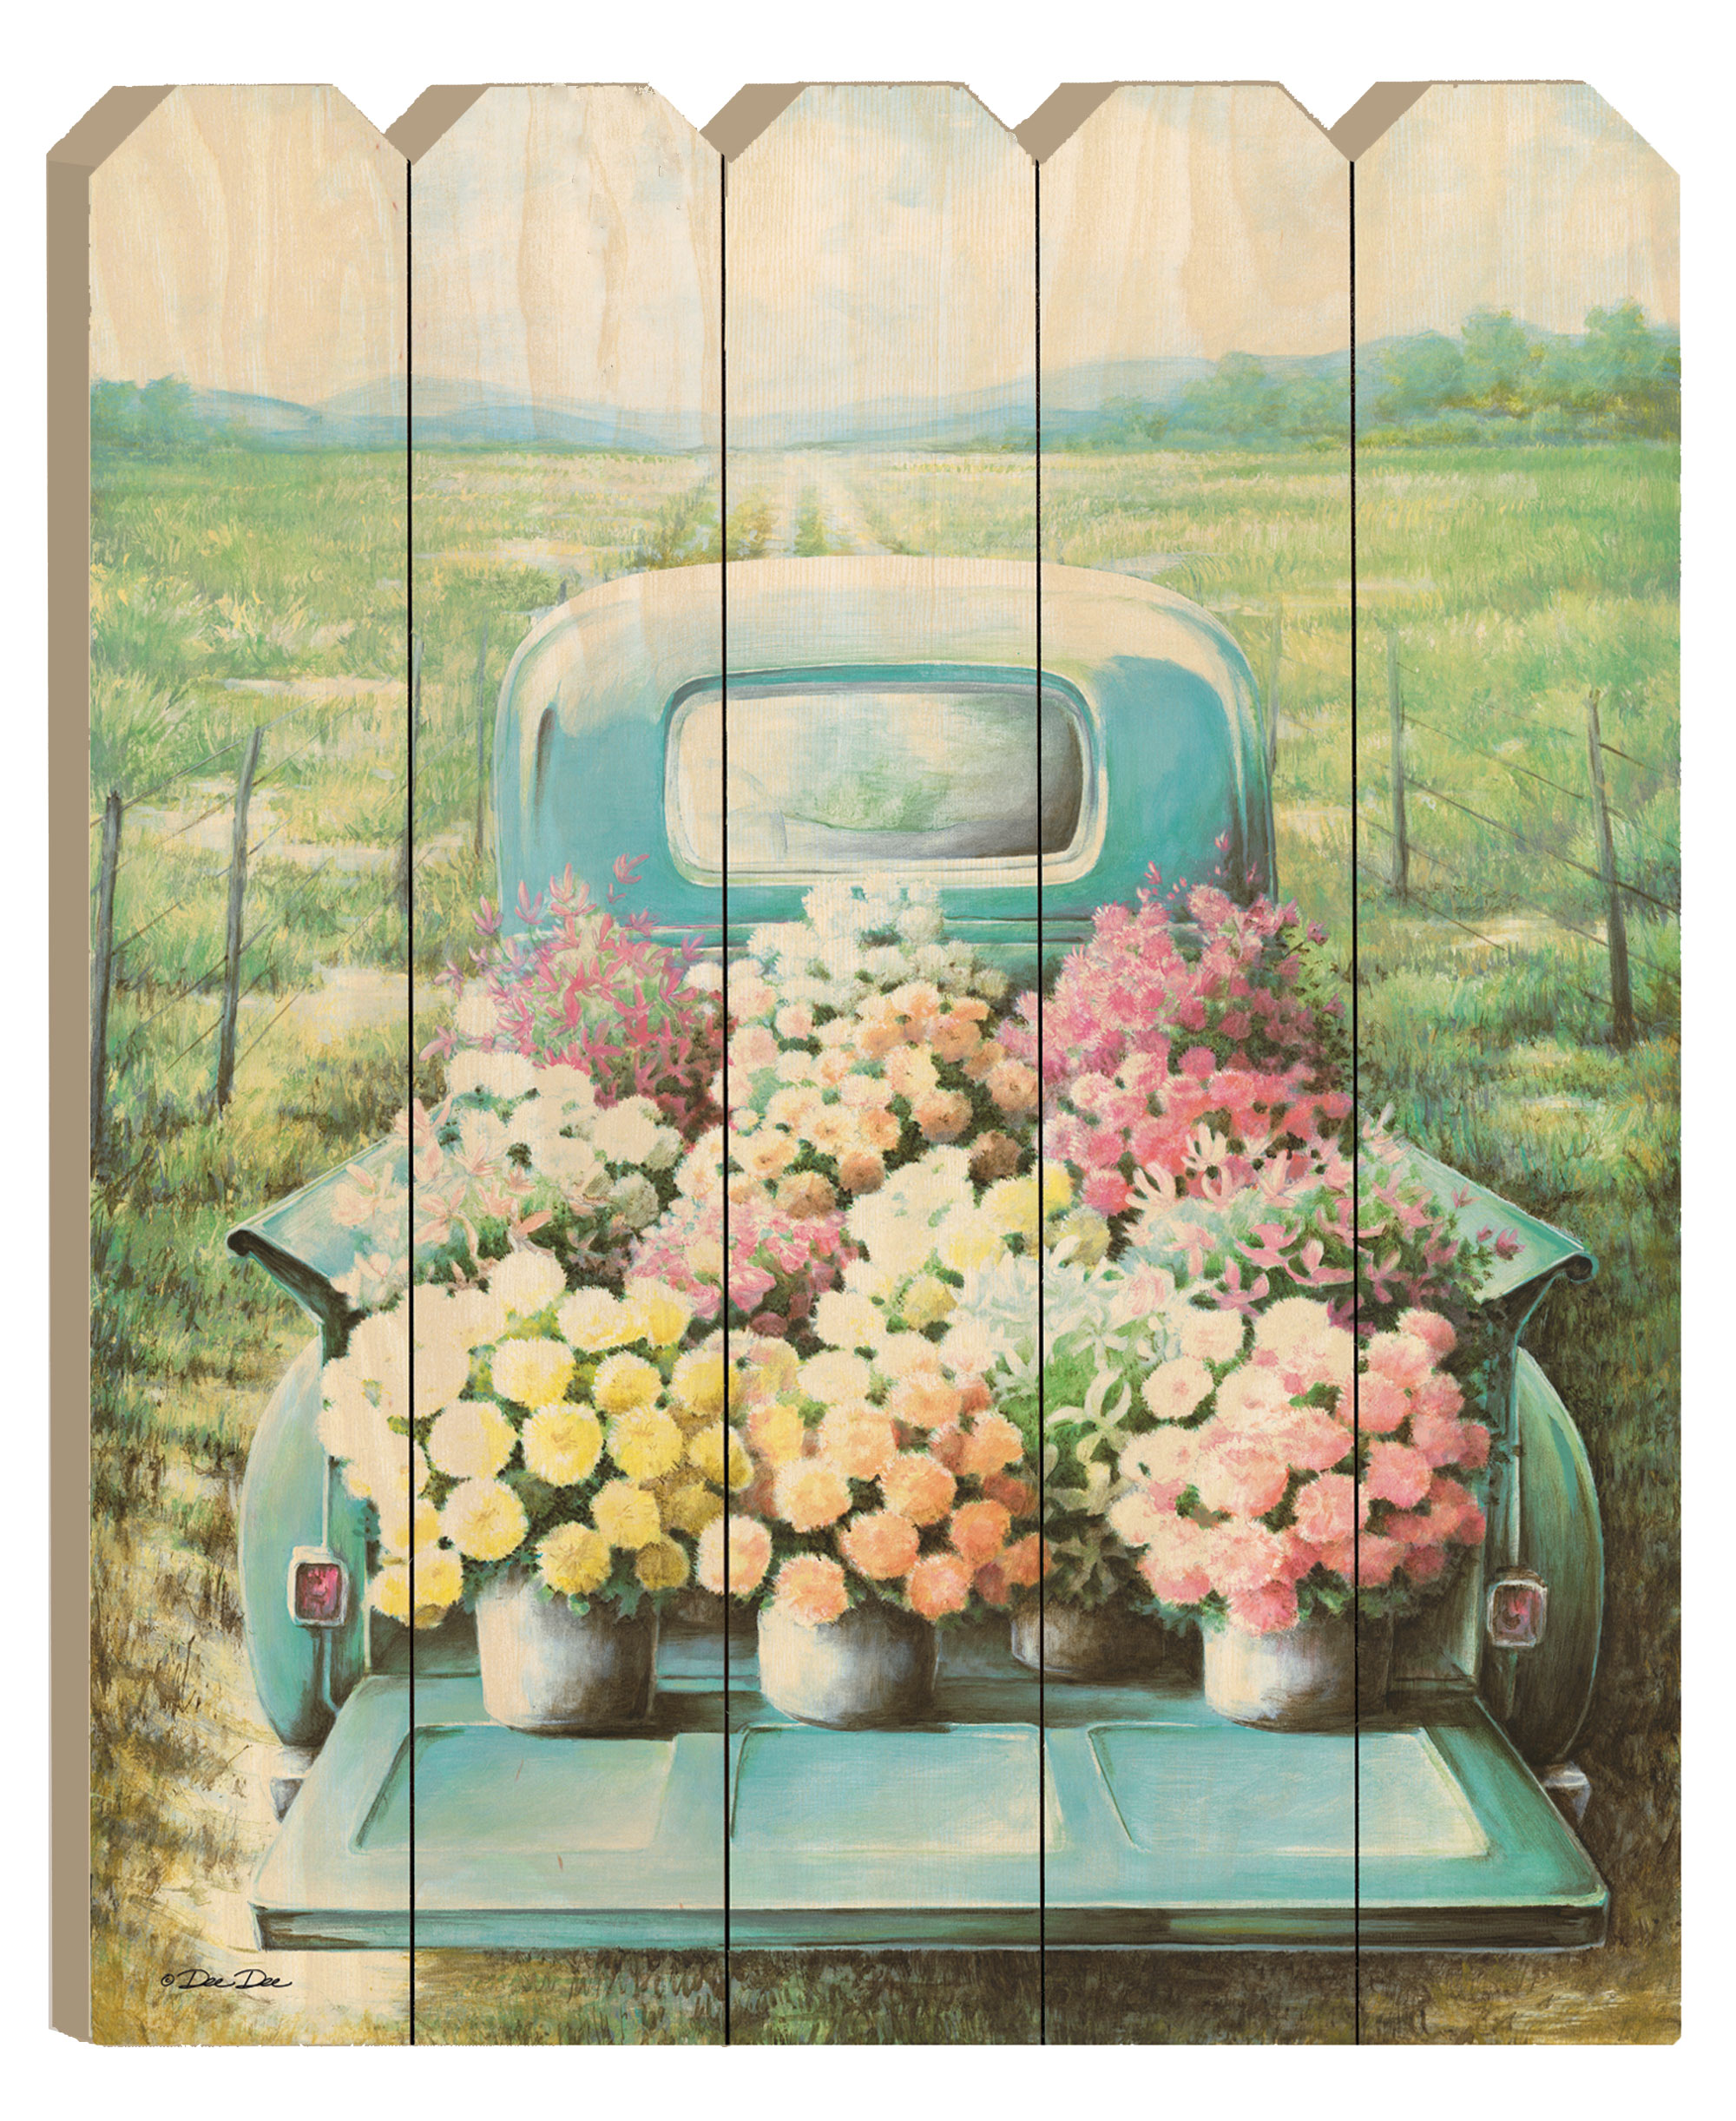 "Flowers for Sale" By Artisan Dee Dee, Printed on Wooden Picket Fence Wall Art